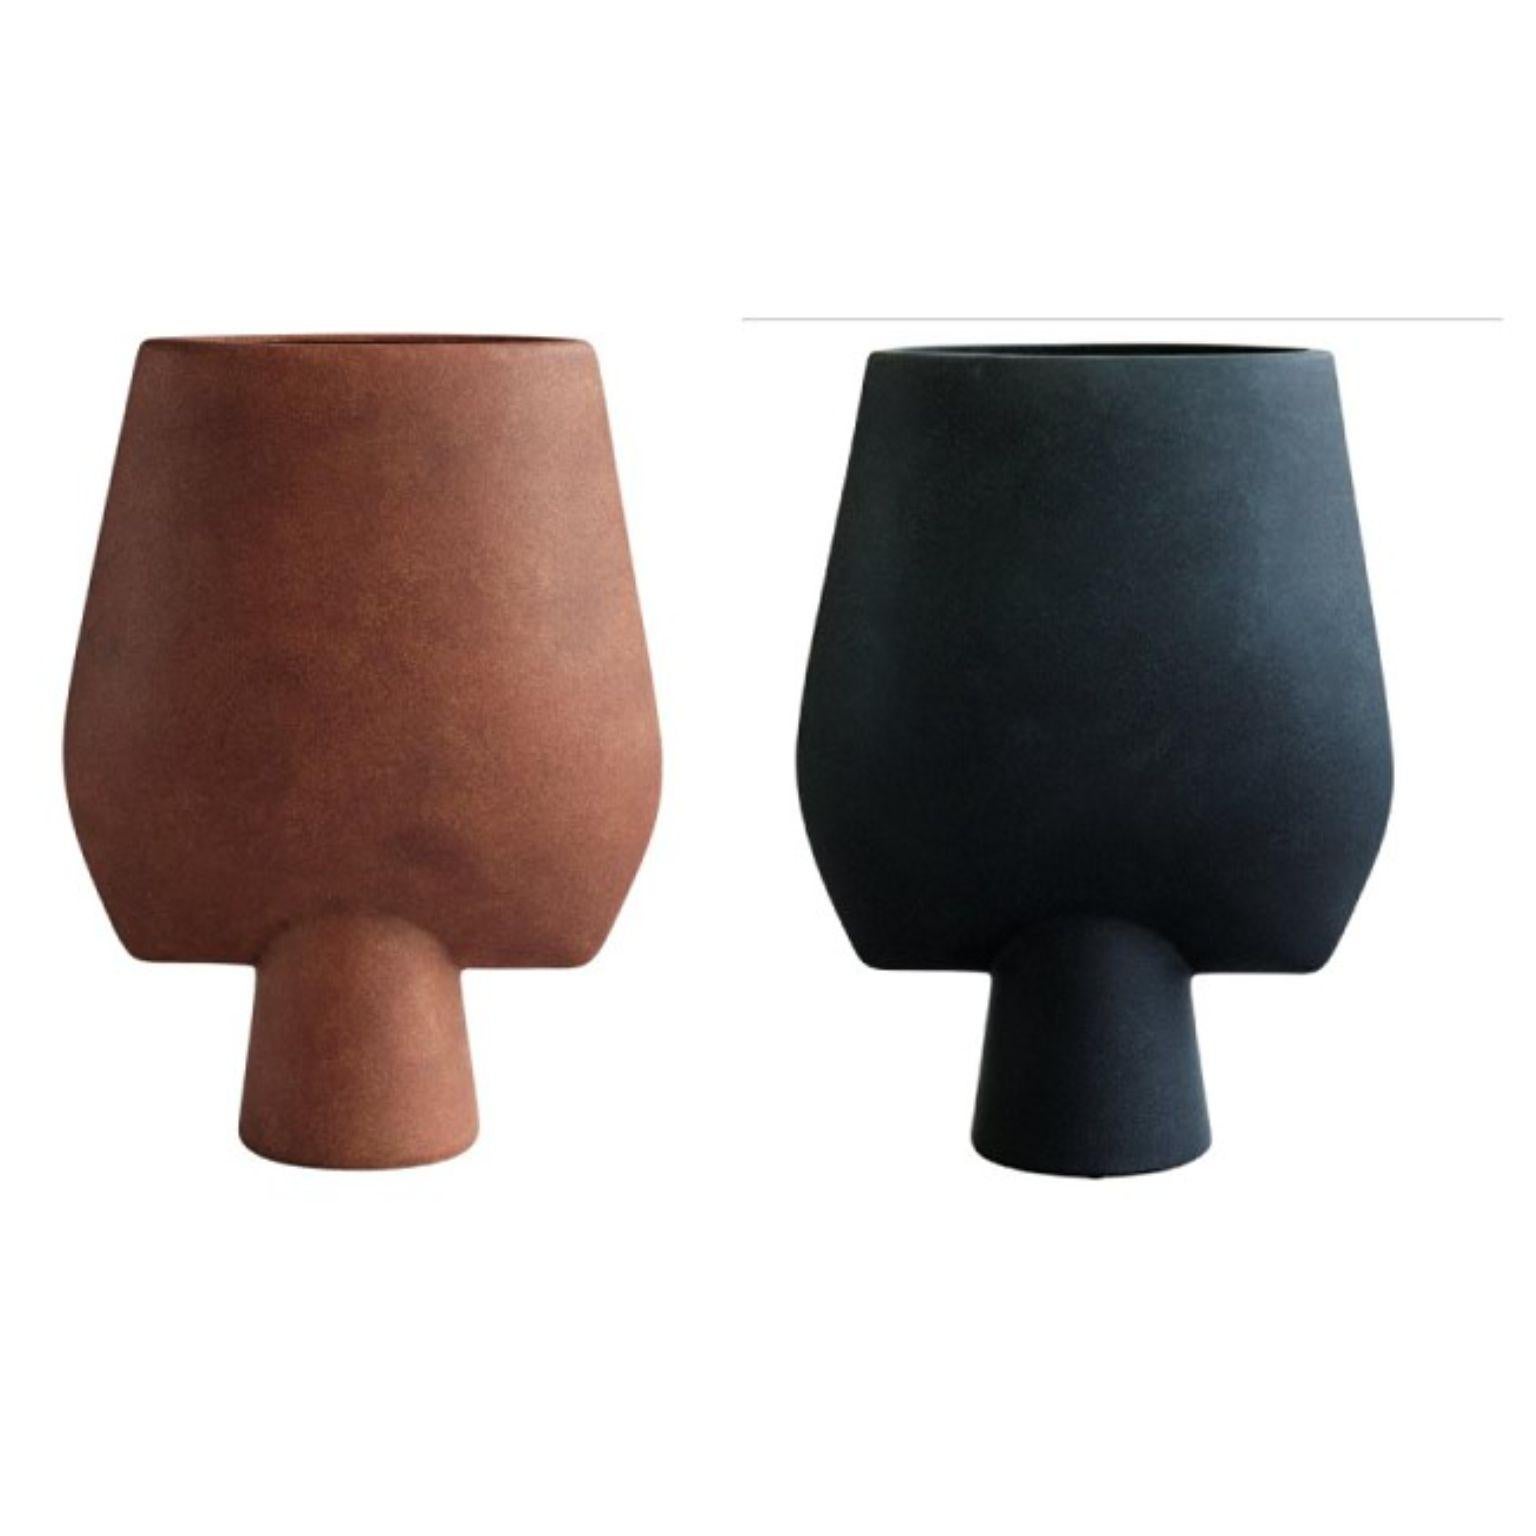 Set of 2 Big Sphere Vases Square by 101 Copenhagen
Designed by Kristian Sofus Hansen & Tommy Hyldahl
Dimensions: L33 / W16 / H43 CM
Materials: Ceramic

The Sphere collection celebrates unique silhouettes and textures that makes an impact with the